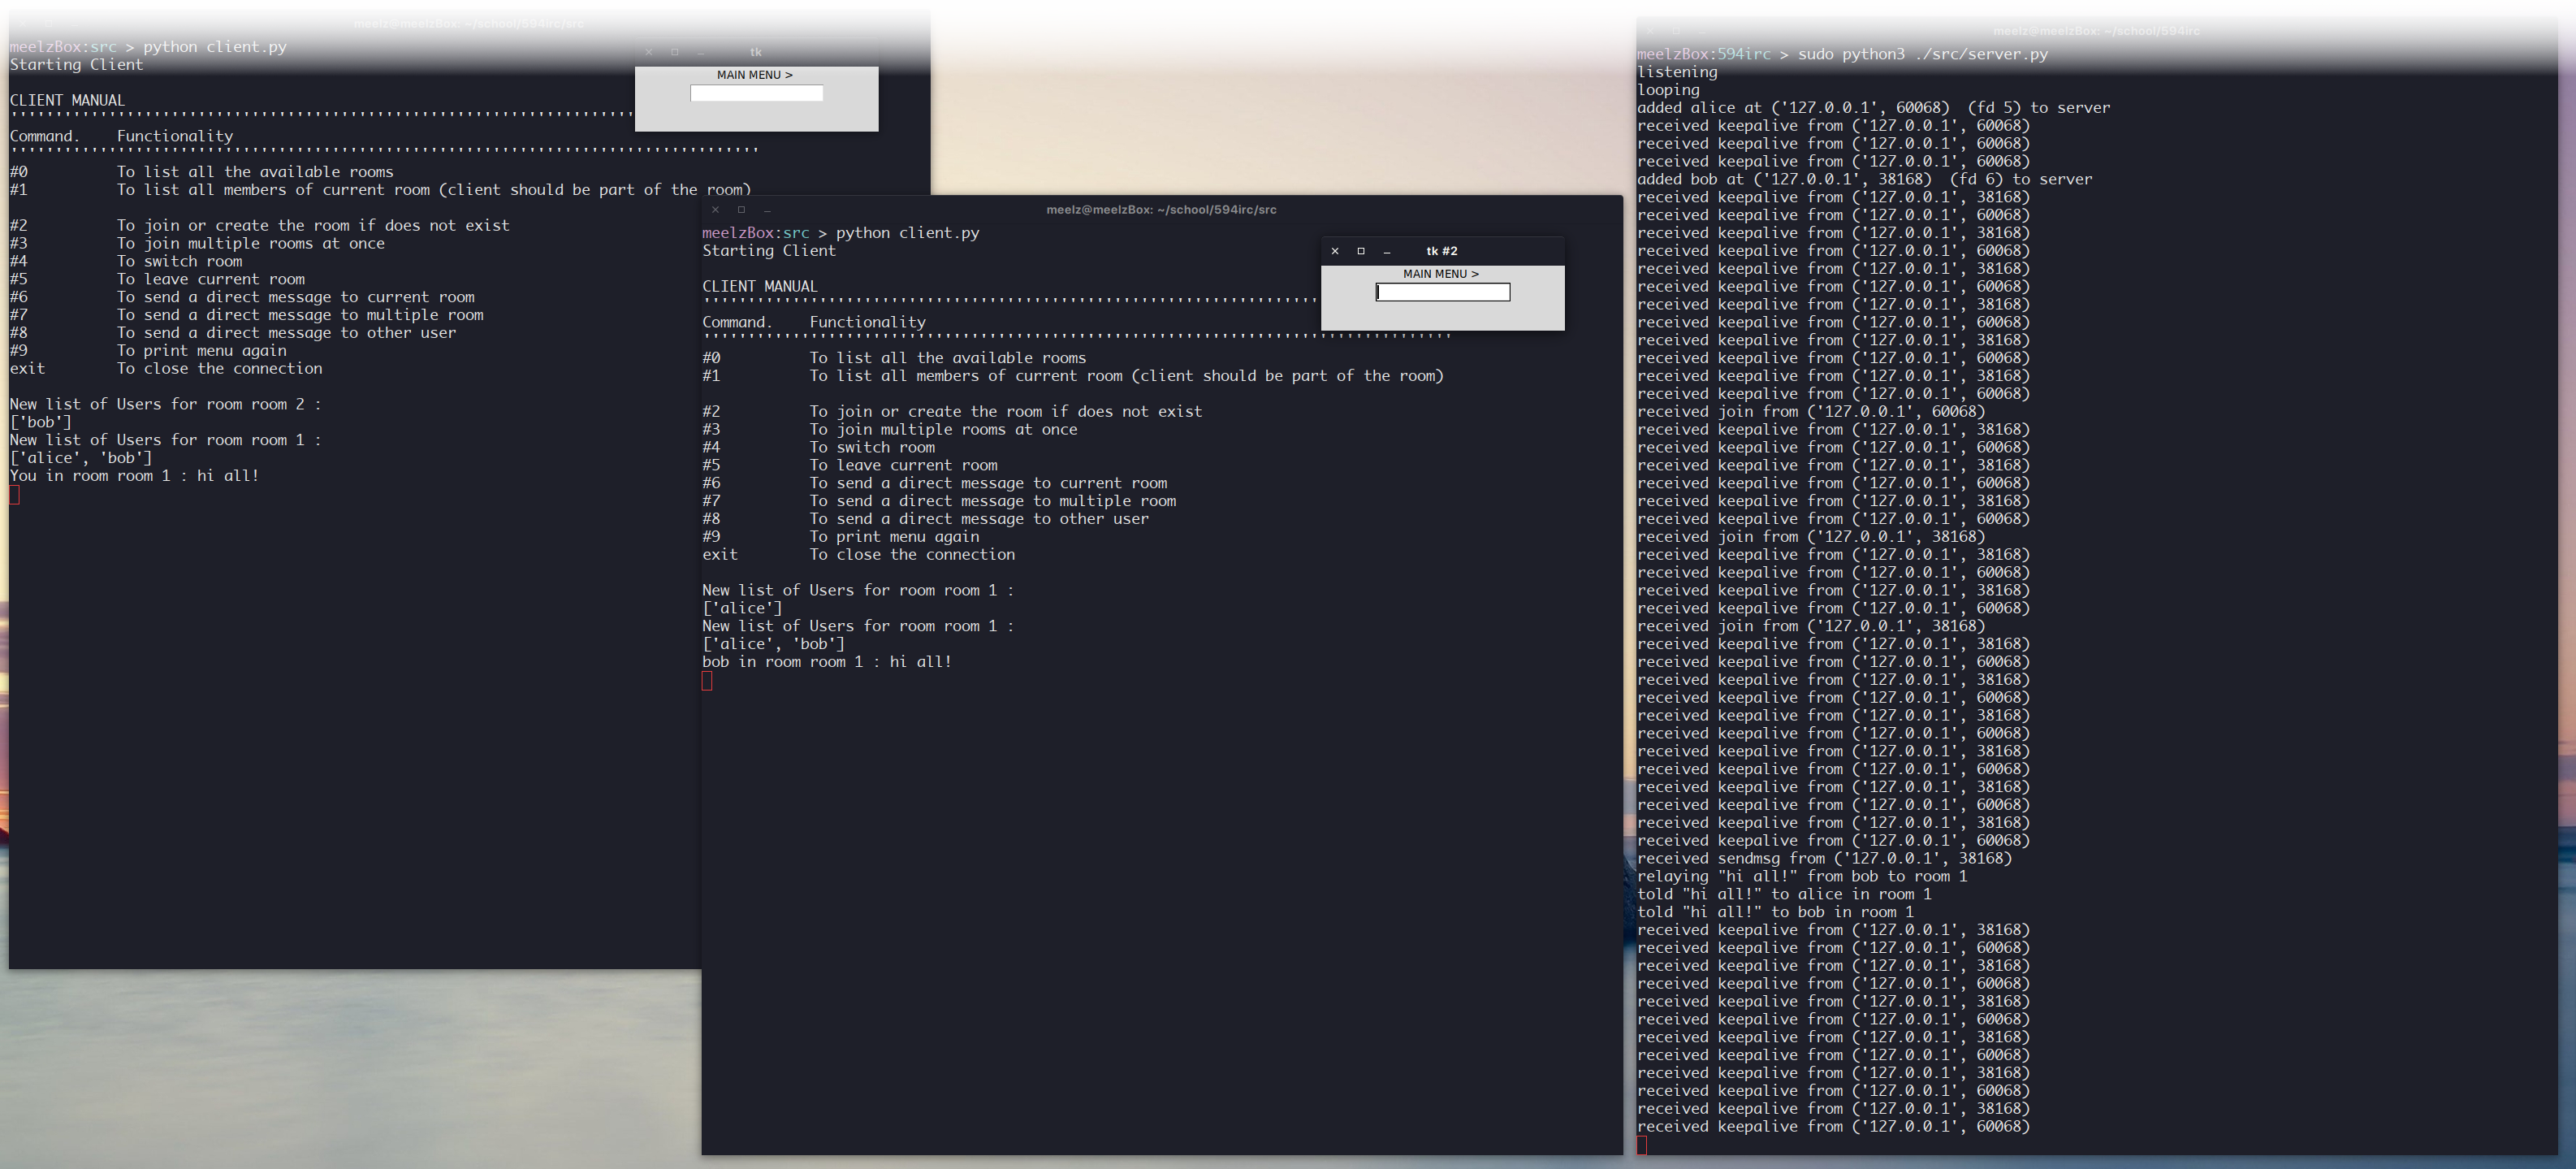 A screenshot of an IRC server and 2 clients running in 3 terminals windows